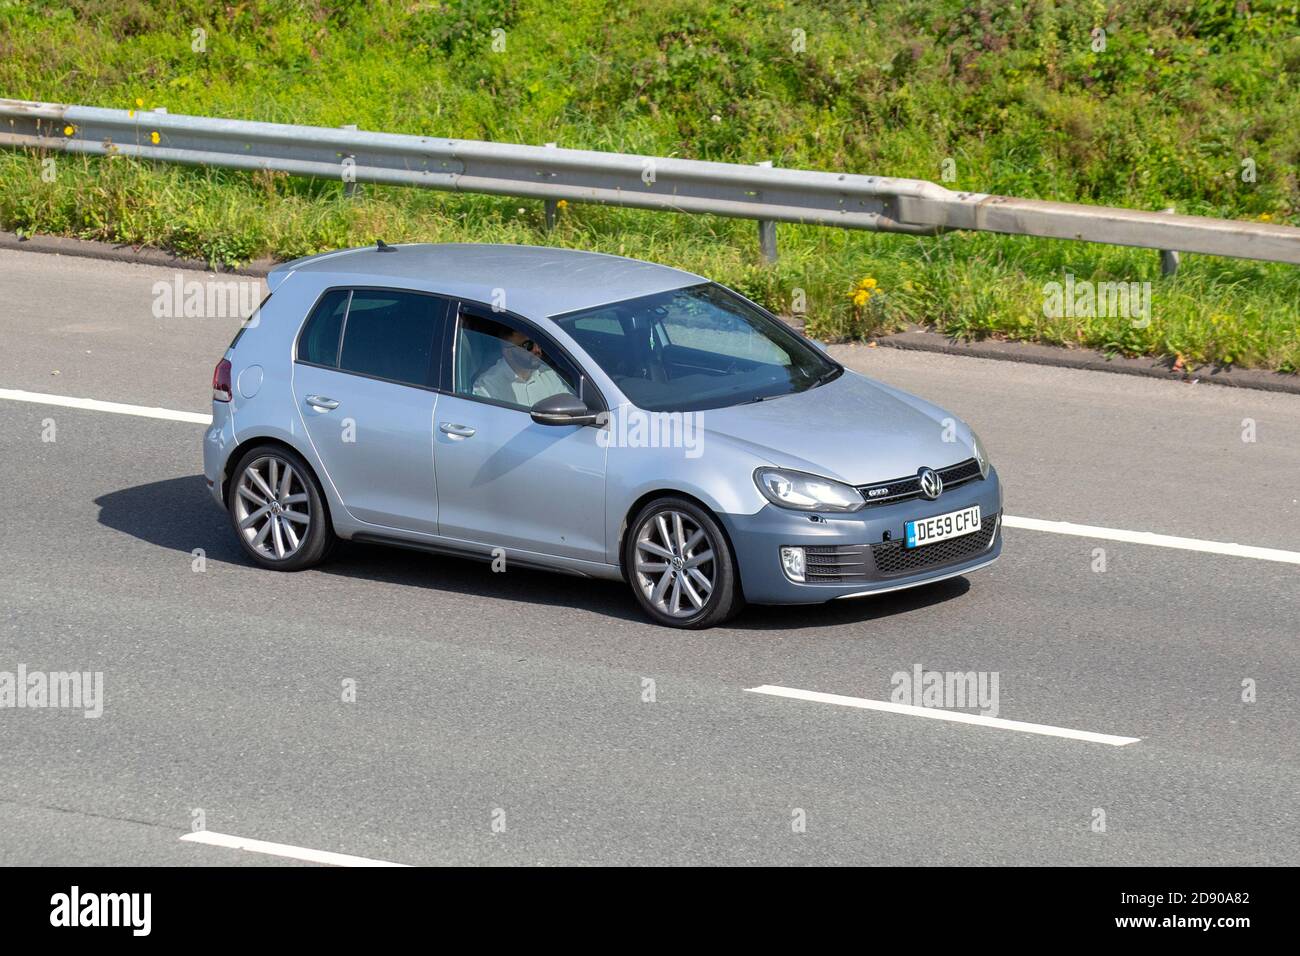 2009 silver Volkswagen Golf GTD S-A; Vehicular traffic, moving vehicles, cars, vehicle driving on UK roads, motors, motoring on the M6 motorway highway UK road network. Stock Photo